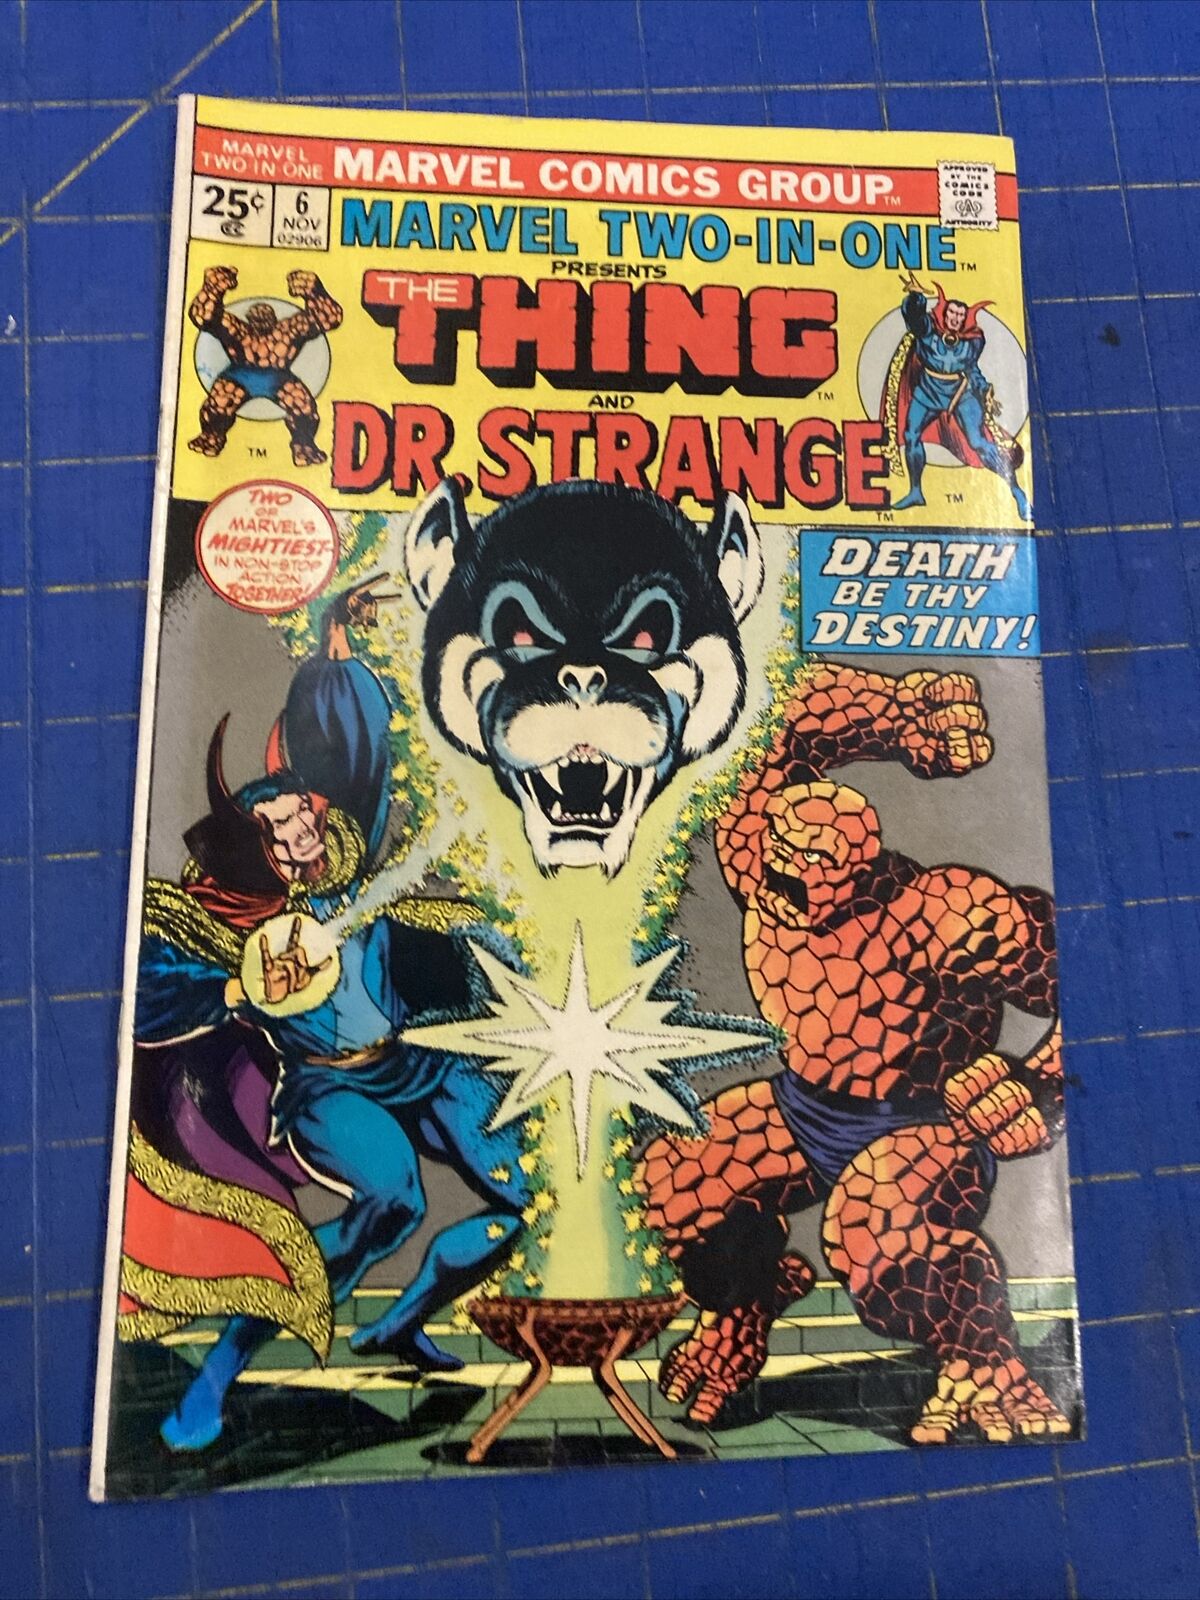 MARVEL TWO-IN-ONE #6, THING/DR. STRANGE (VG) Very Bright, Colorful & Glossy